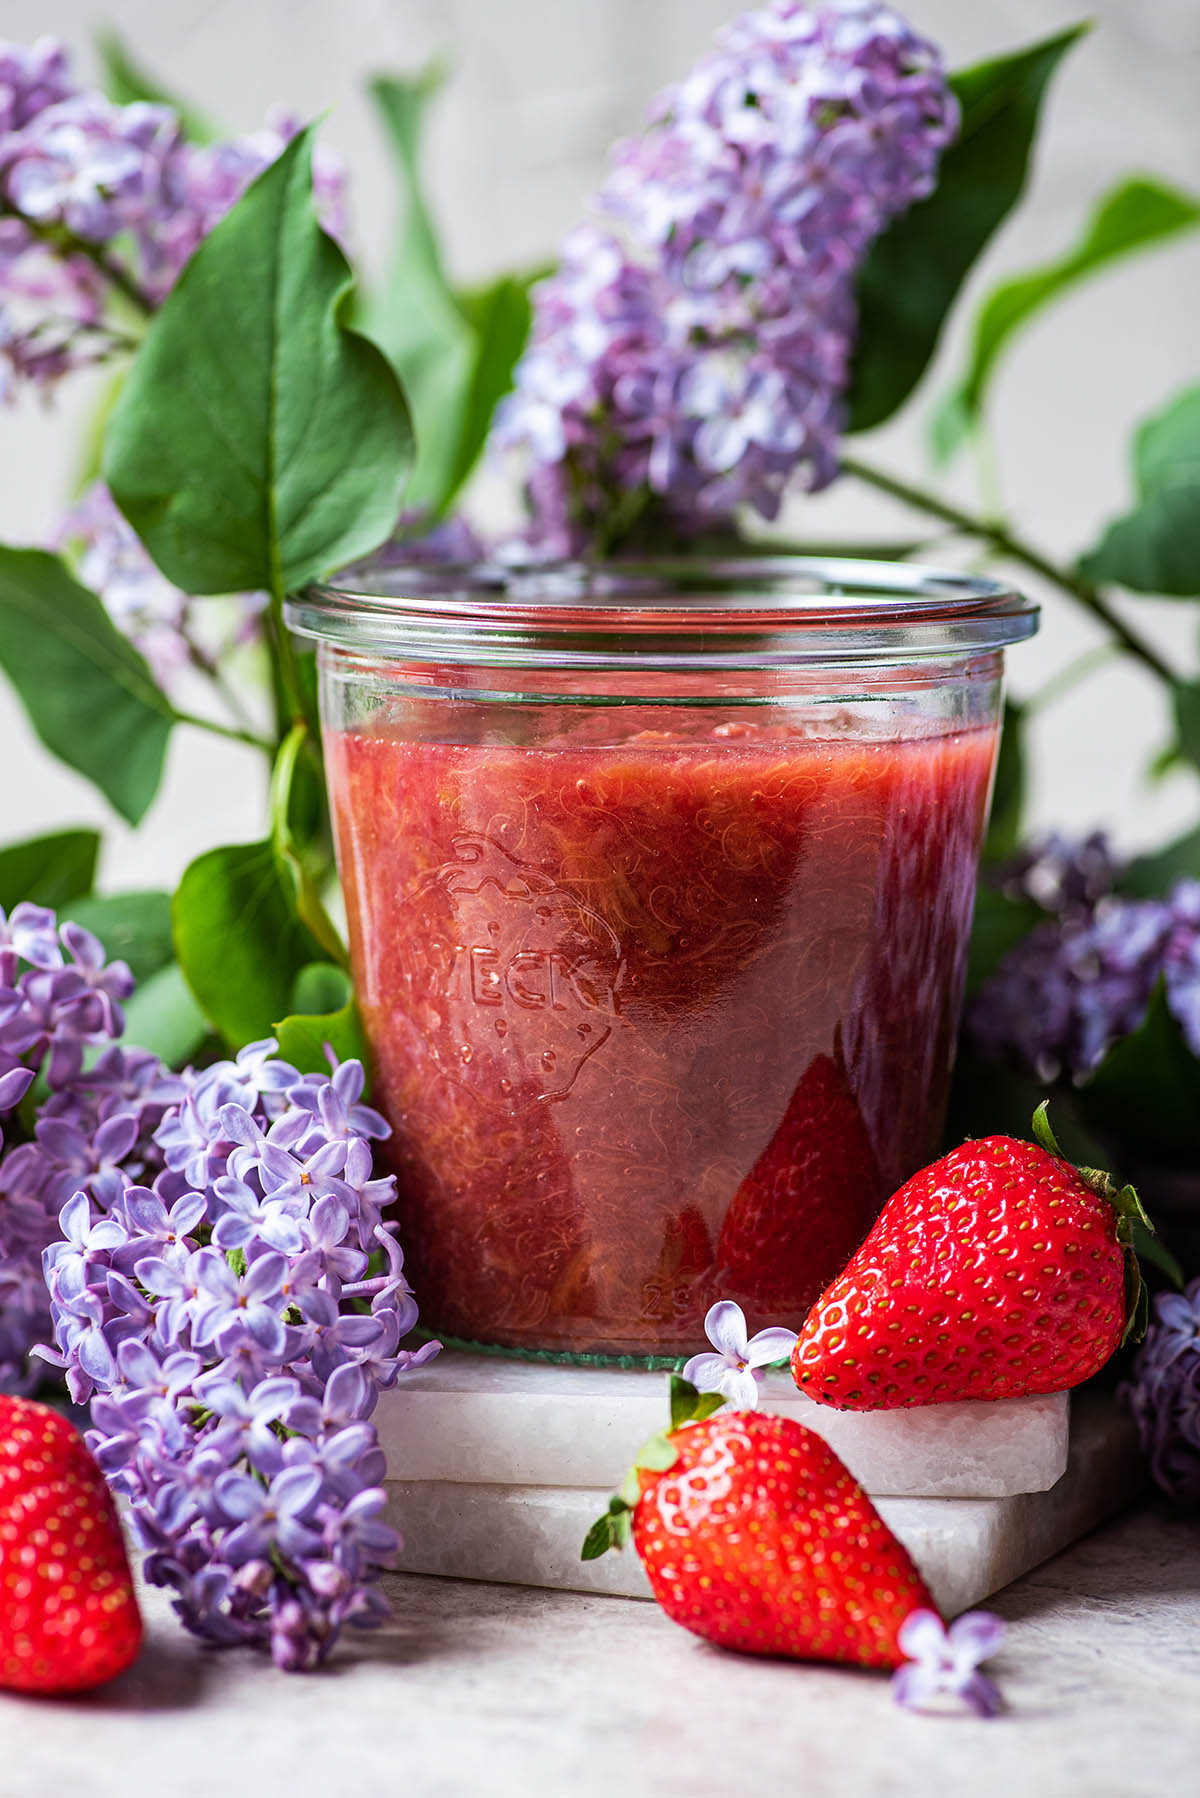 Rhubarb compote in a glass with lilacs and berries.